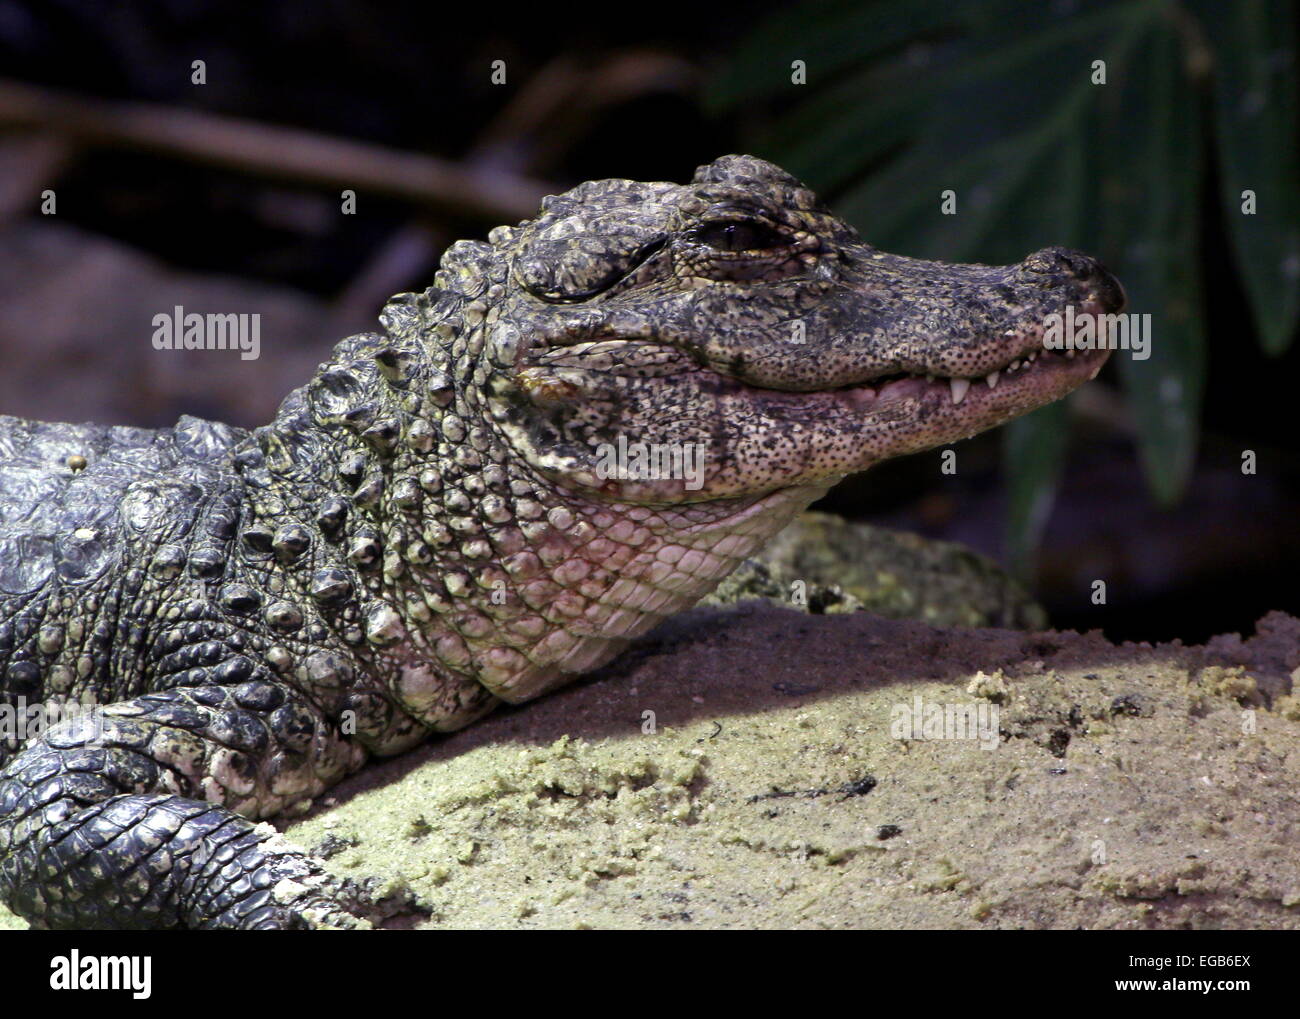 Chinese alligator (Alligator sinensis), close-up of the head, seen in profile Stock Photo